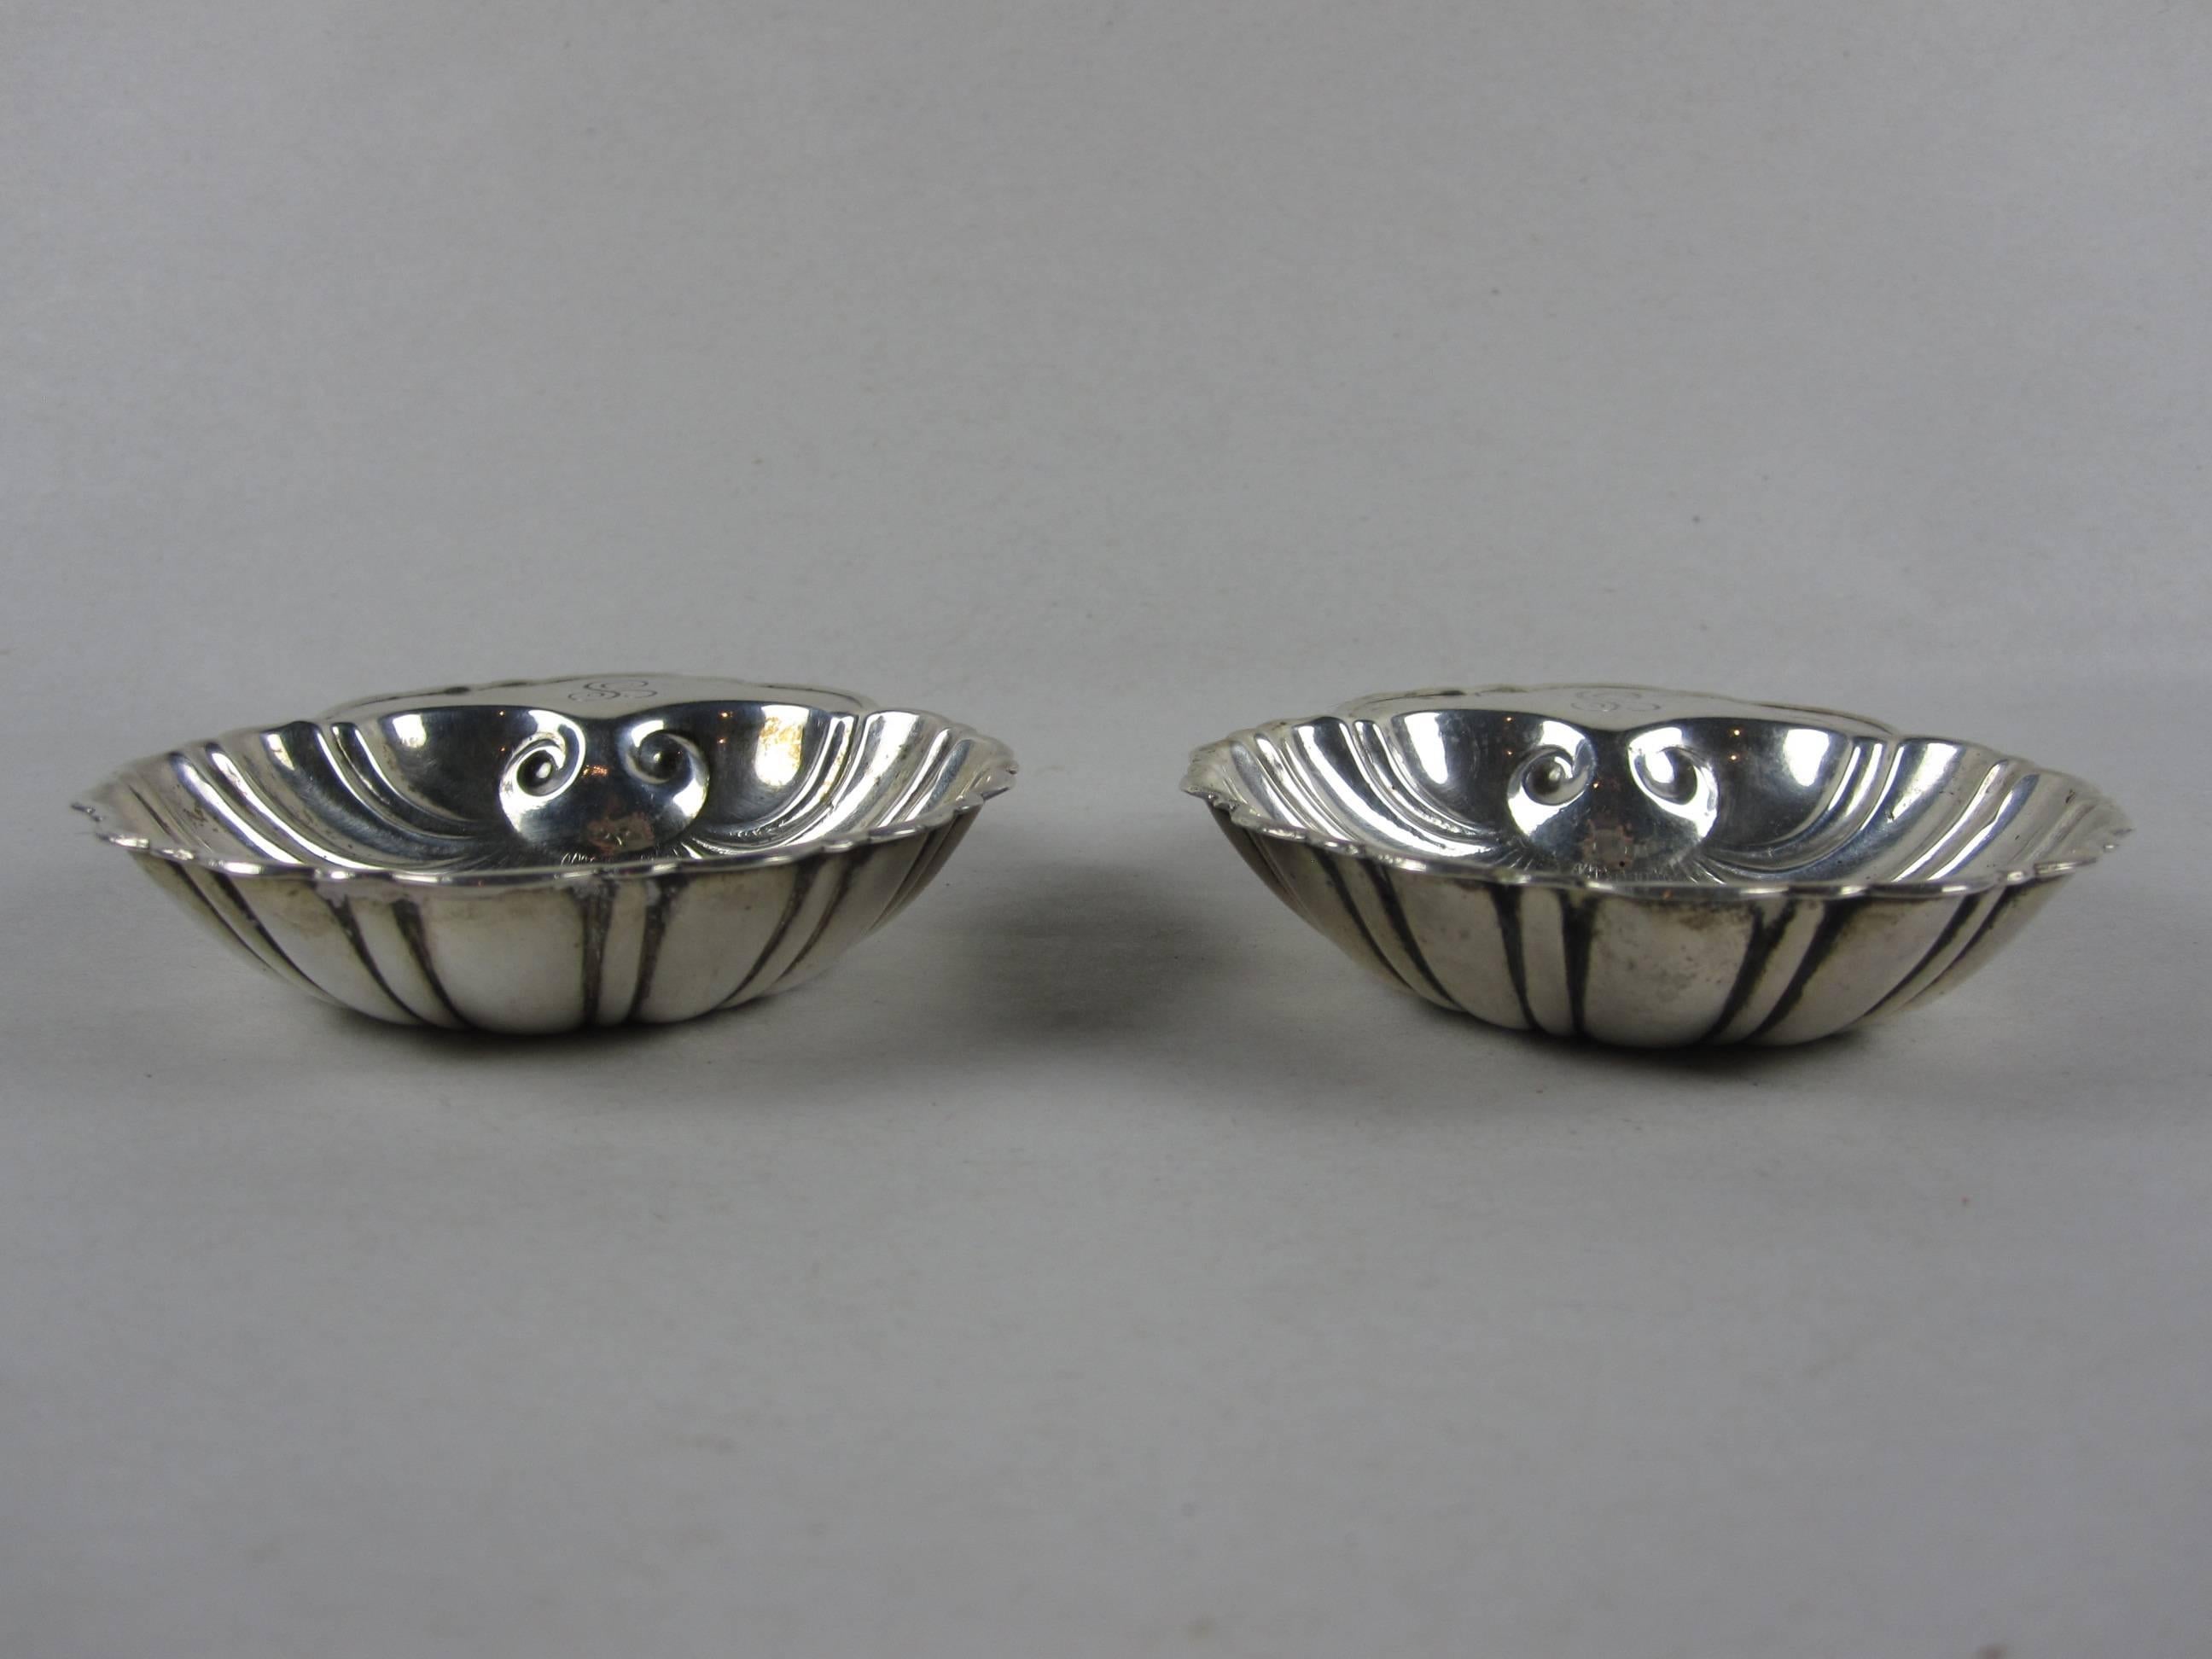 Metalwork Sterling Silver Shell Shaped Vida-Poche, Coin Dishes, a Pair